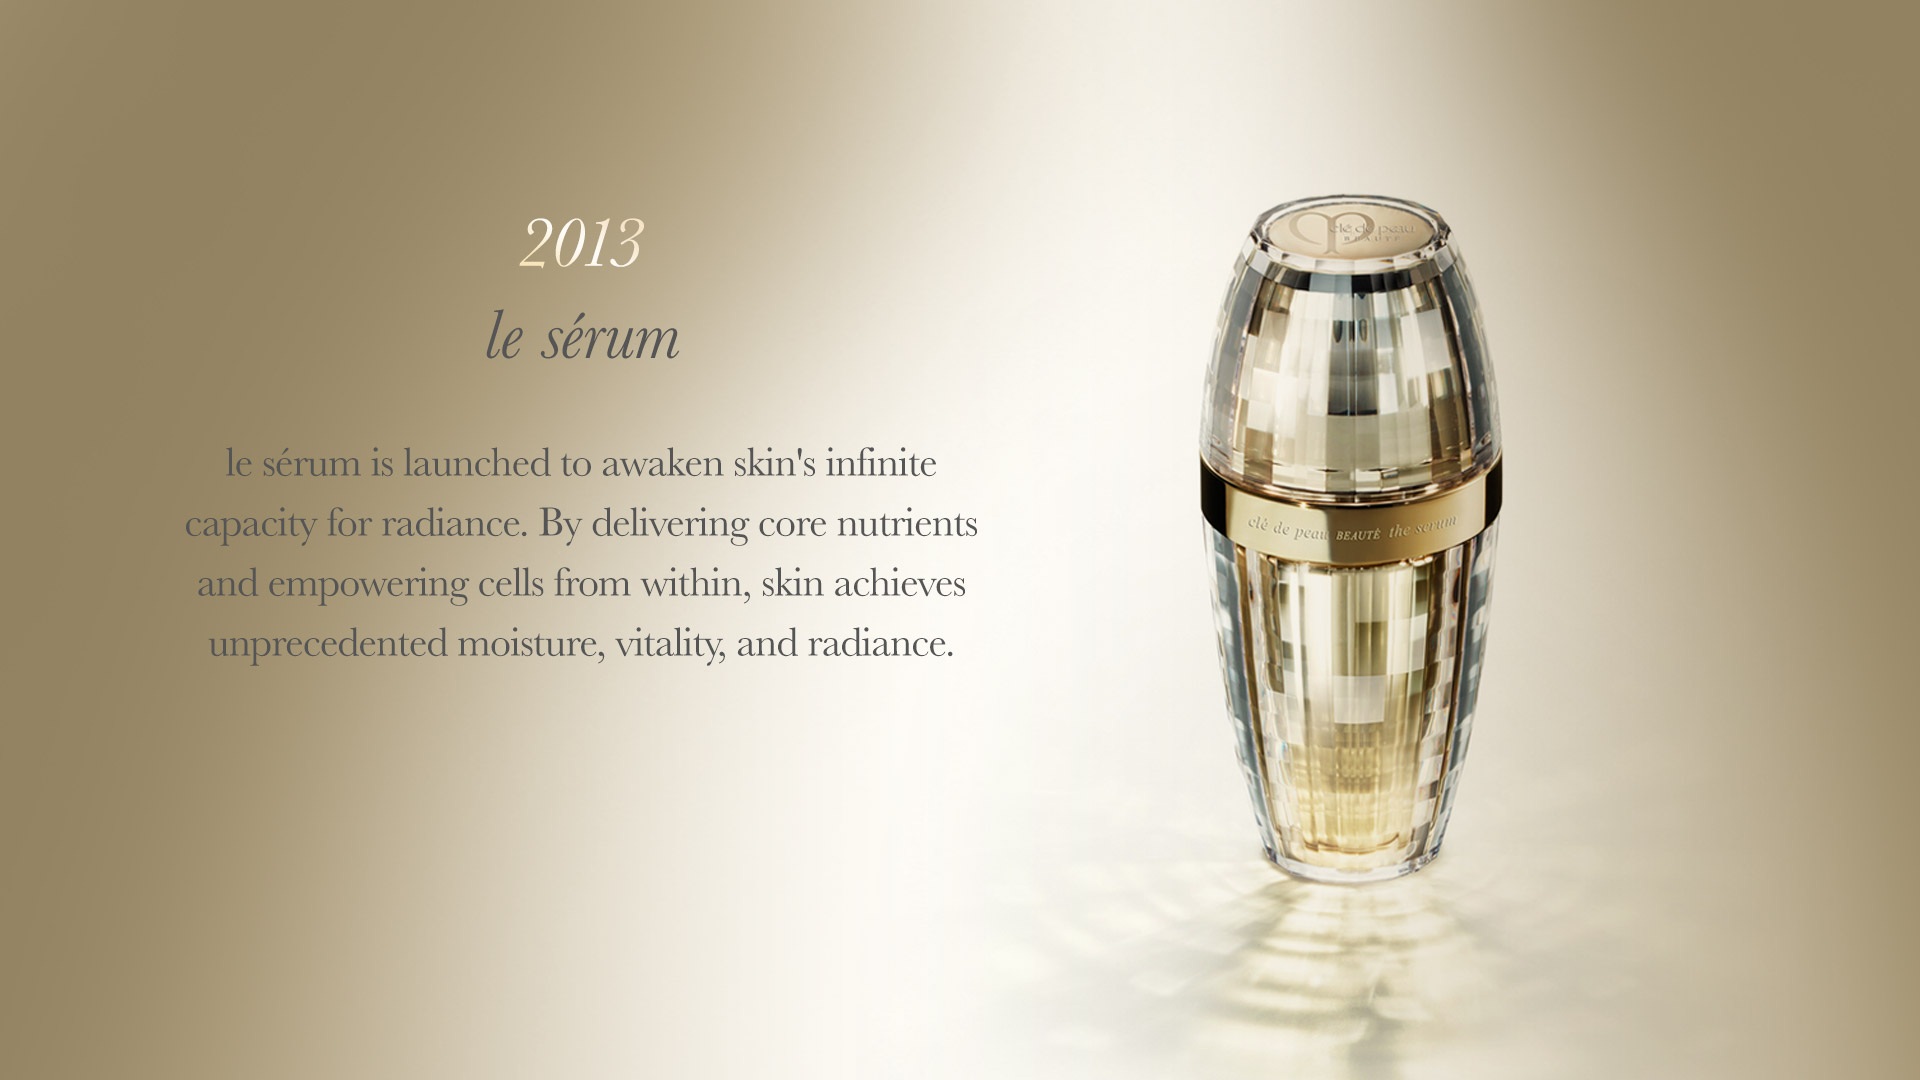 Le Sérum is launched to awaken skin's infinite capacity for radiance. By delivering core nutrients and empowering cells from within, skin achieves unprecedented moisture, vitality and radiance.